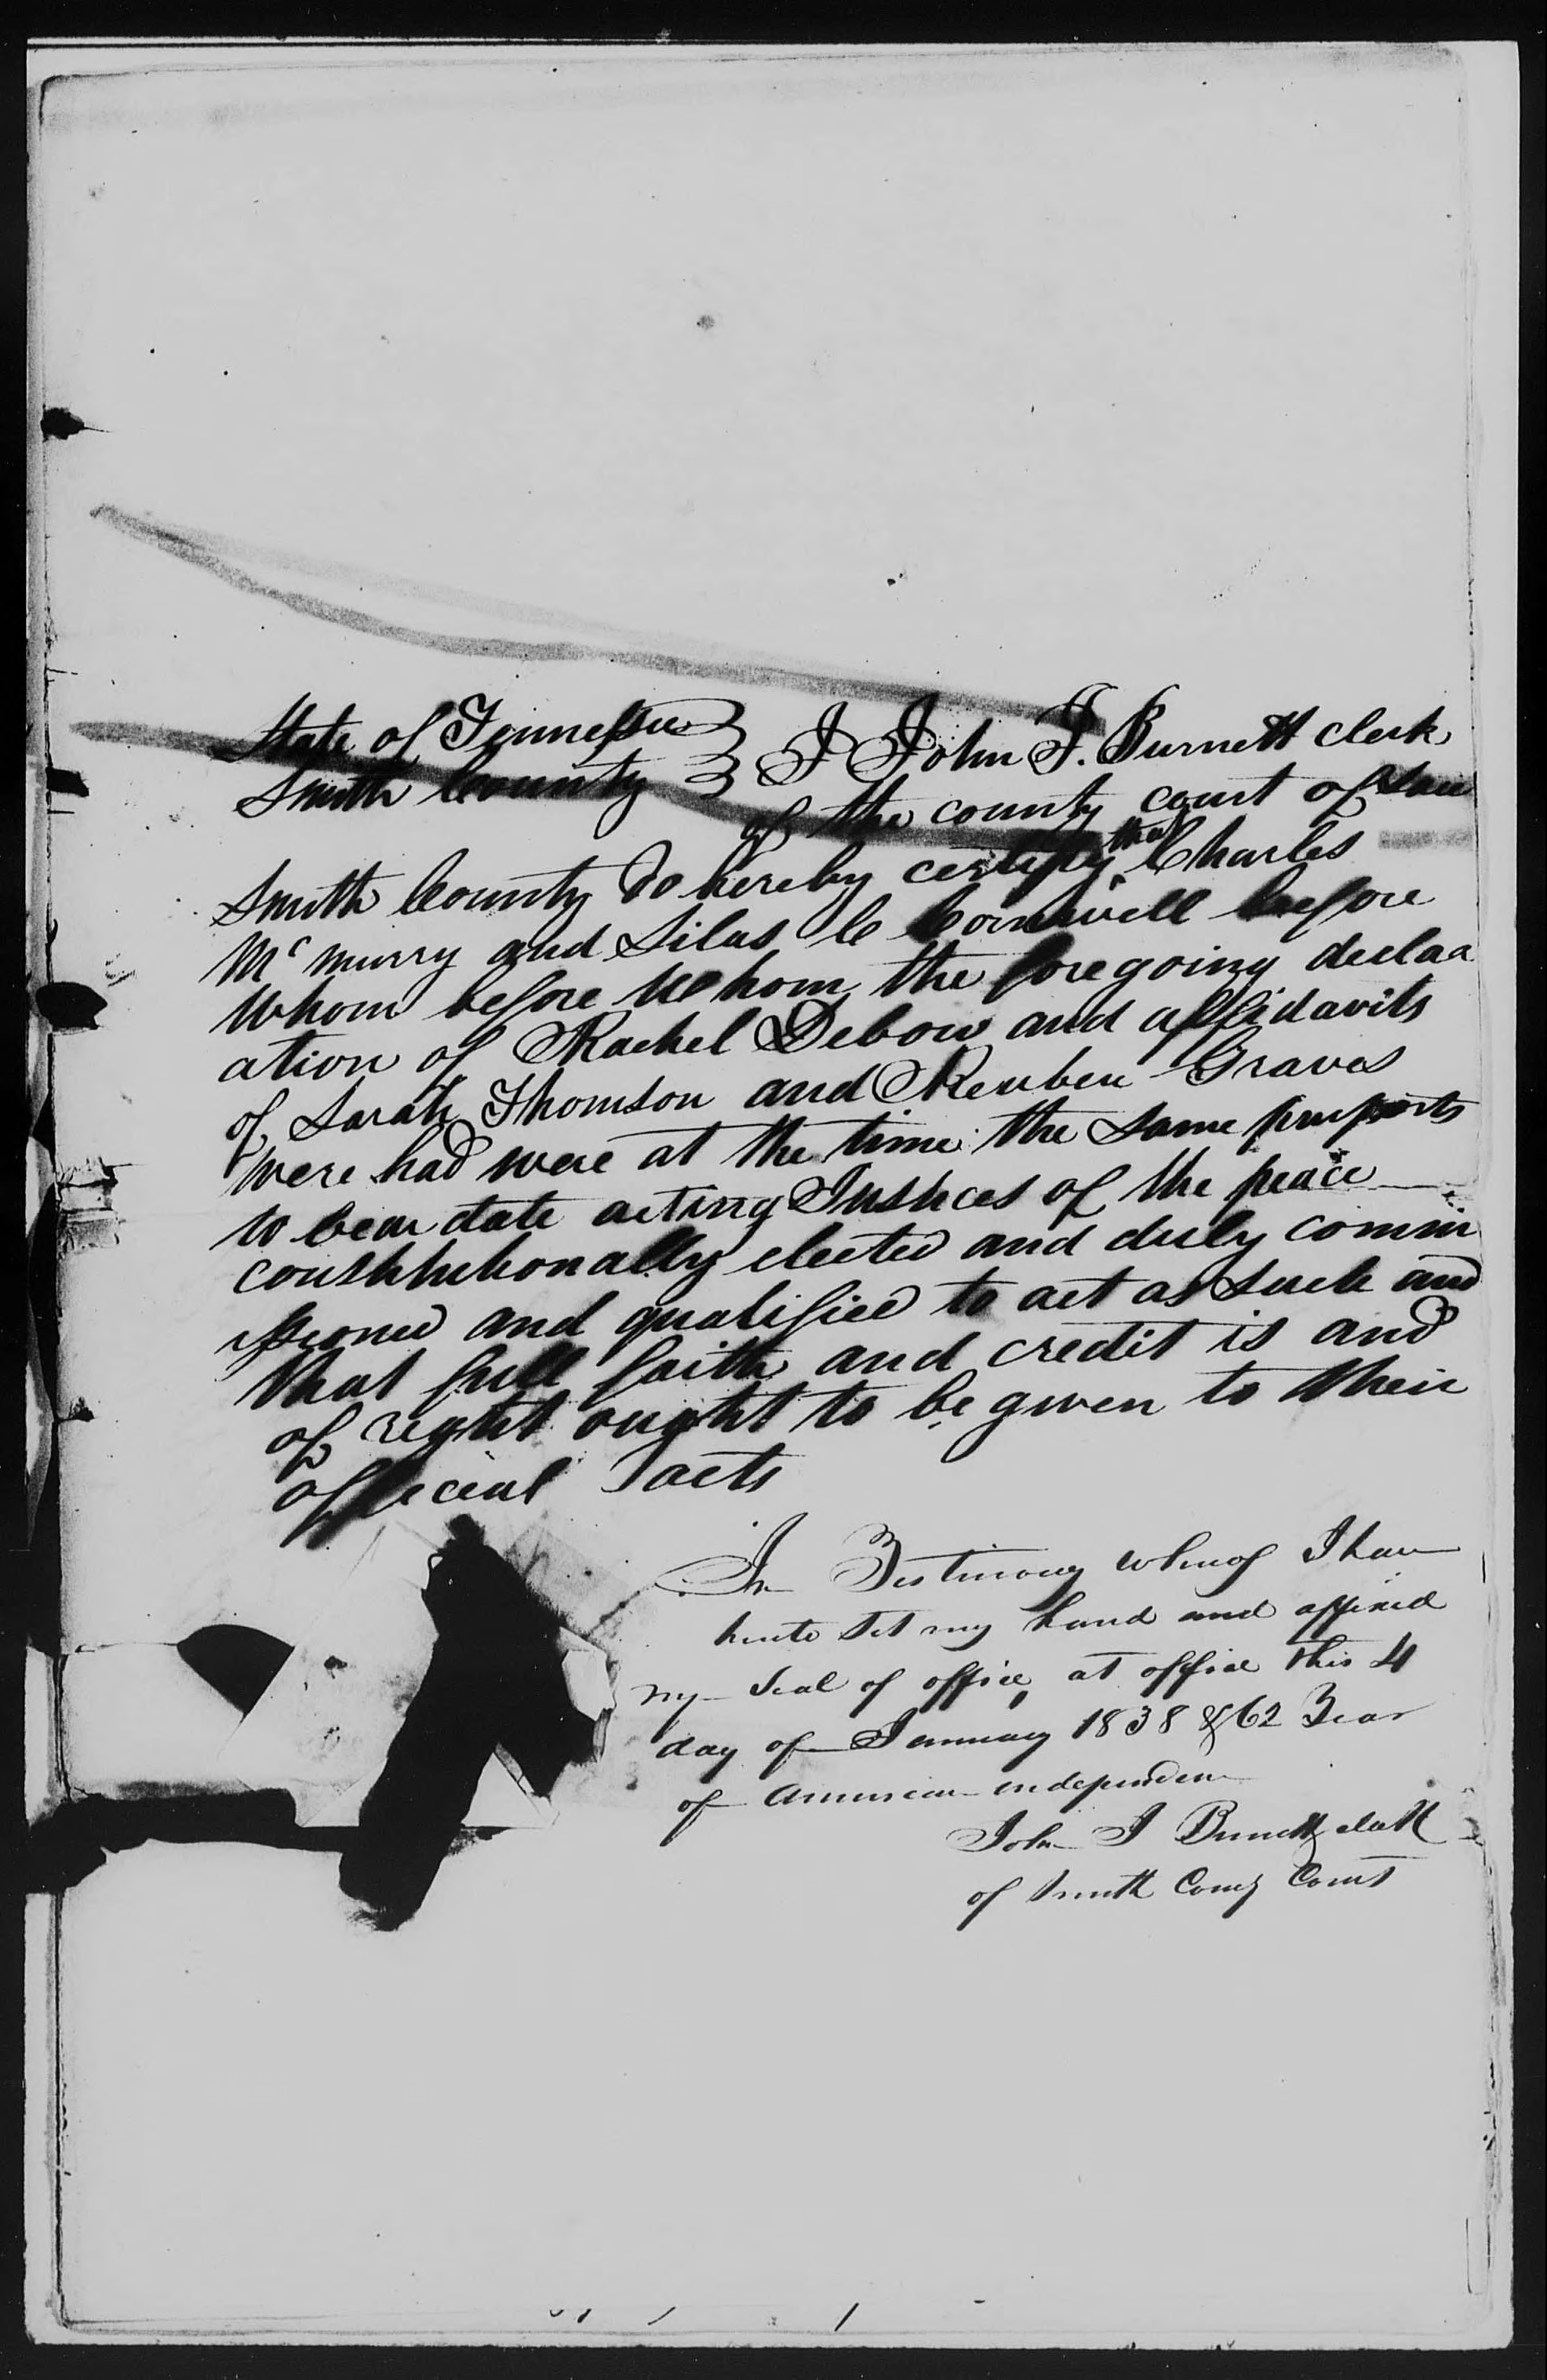 Affidavit of Reuben Graves in support of a Pension Claim for Rachel Debow, 22 July 1837, page 3